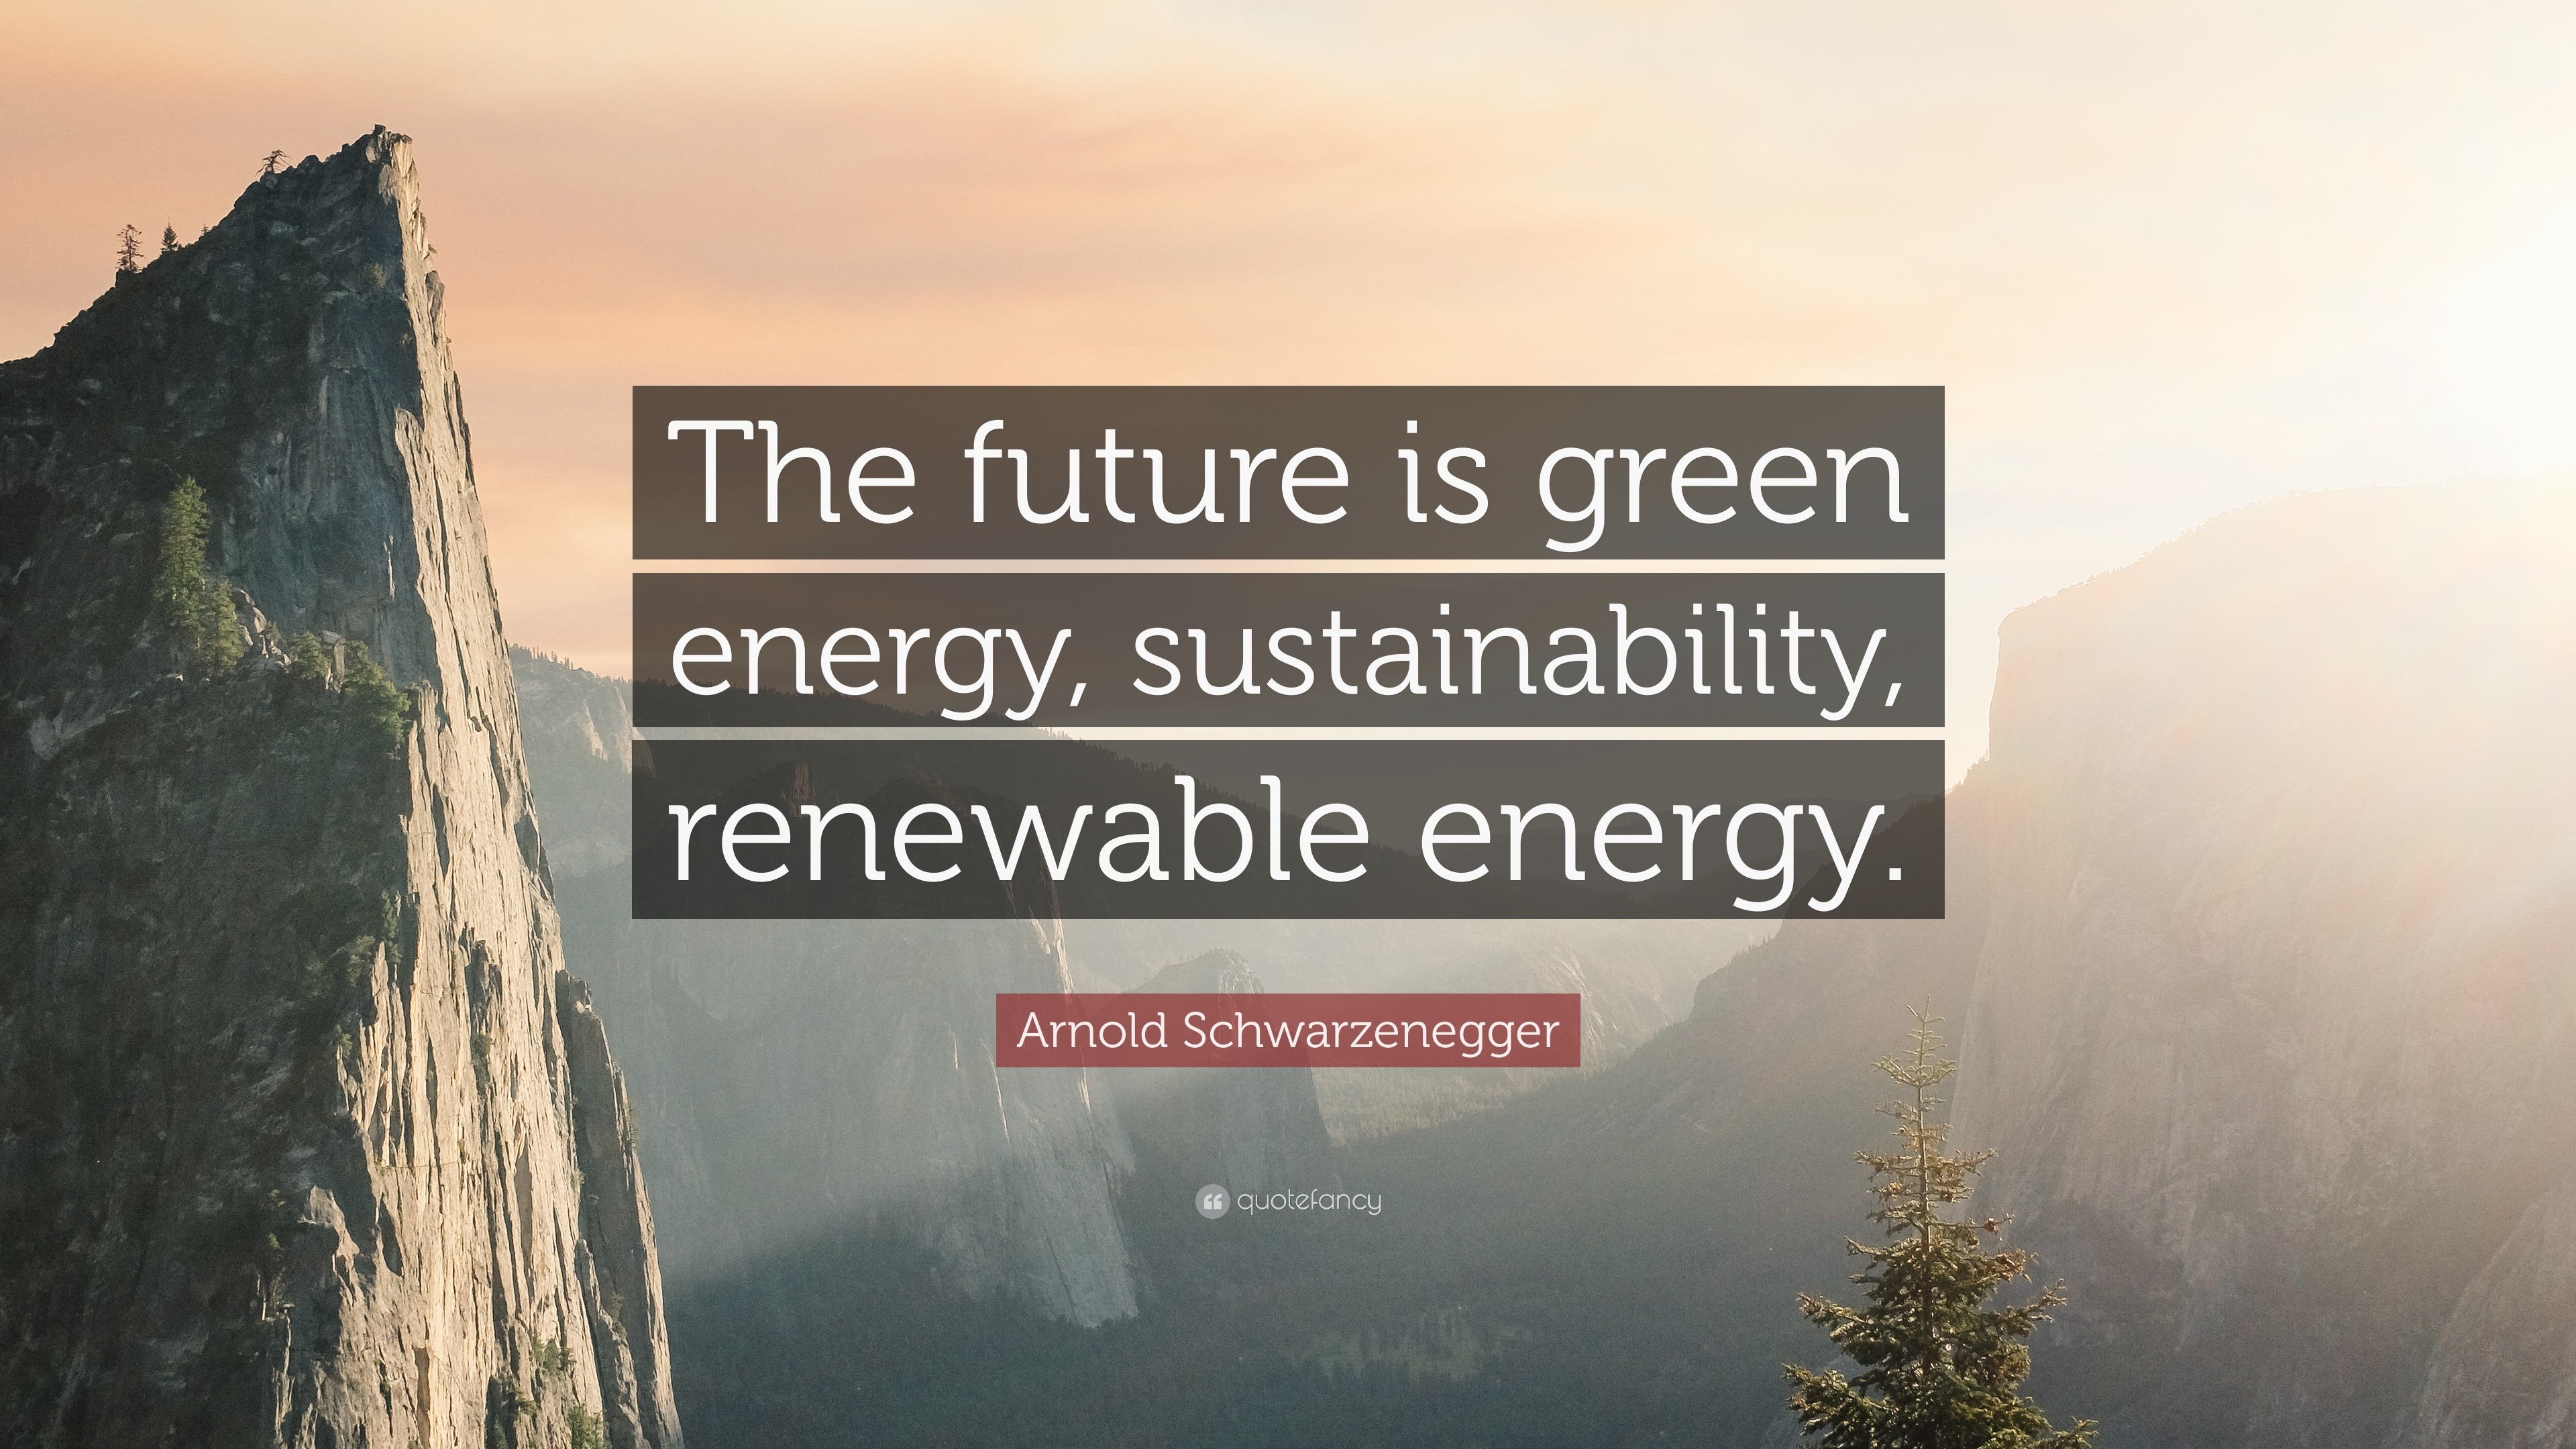 Arnold Schwarzenegger Quote: “The future is green energy